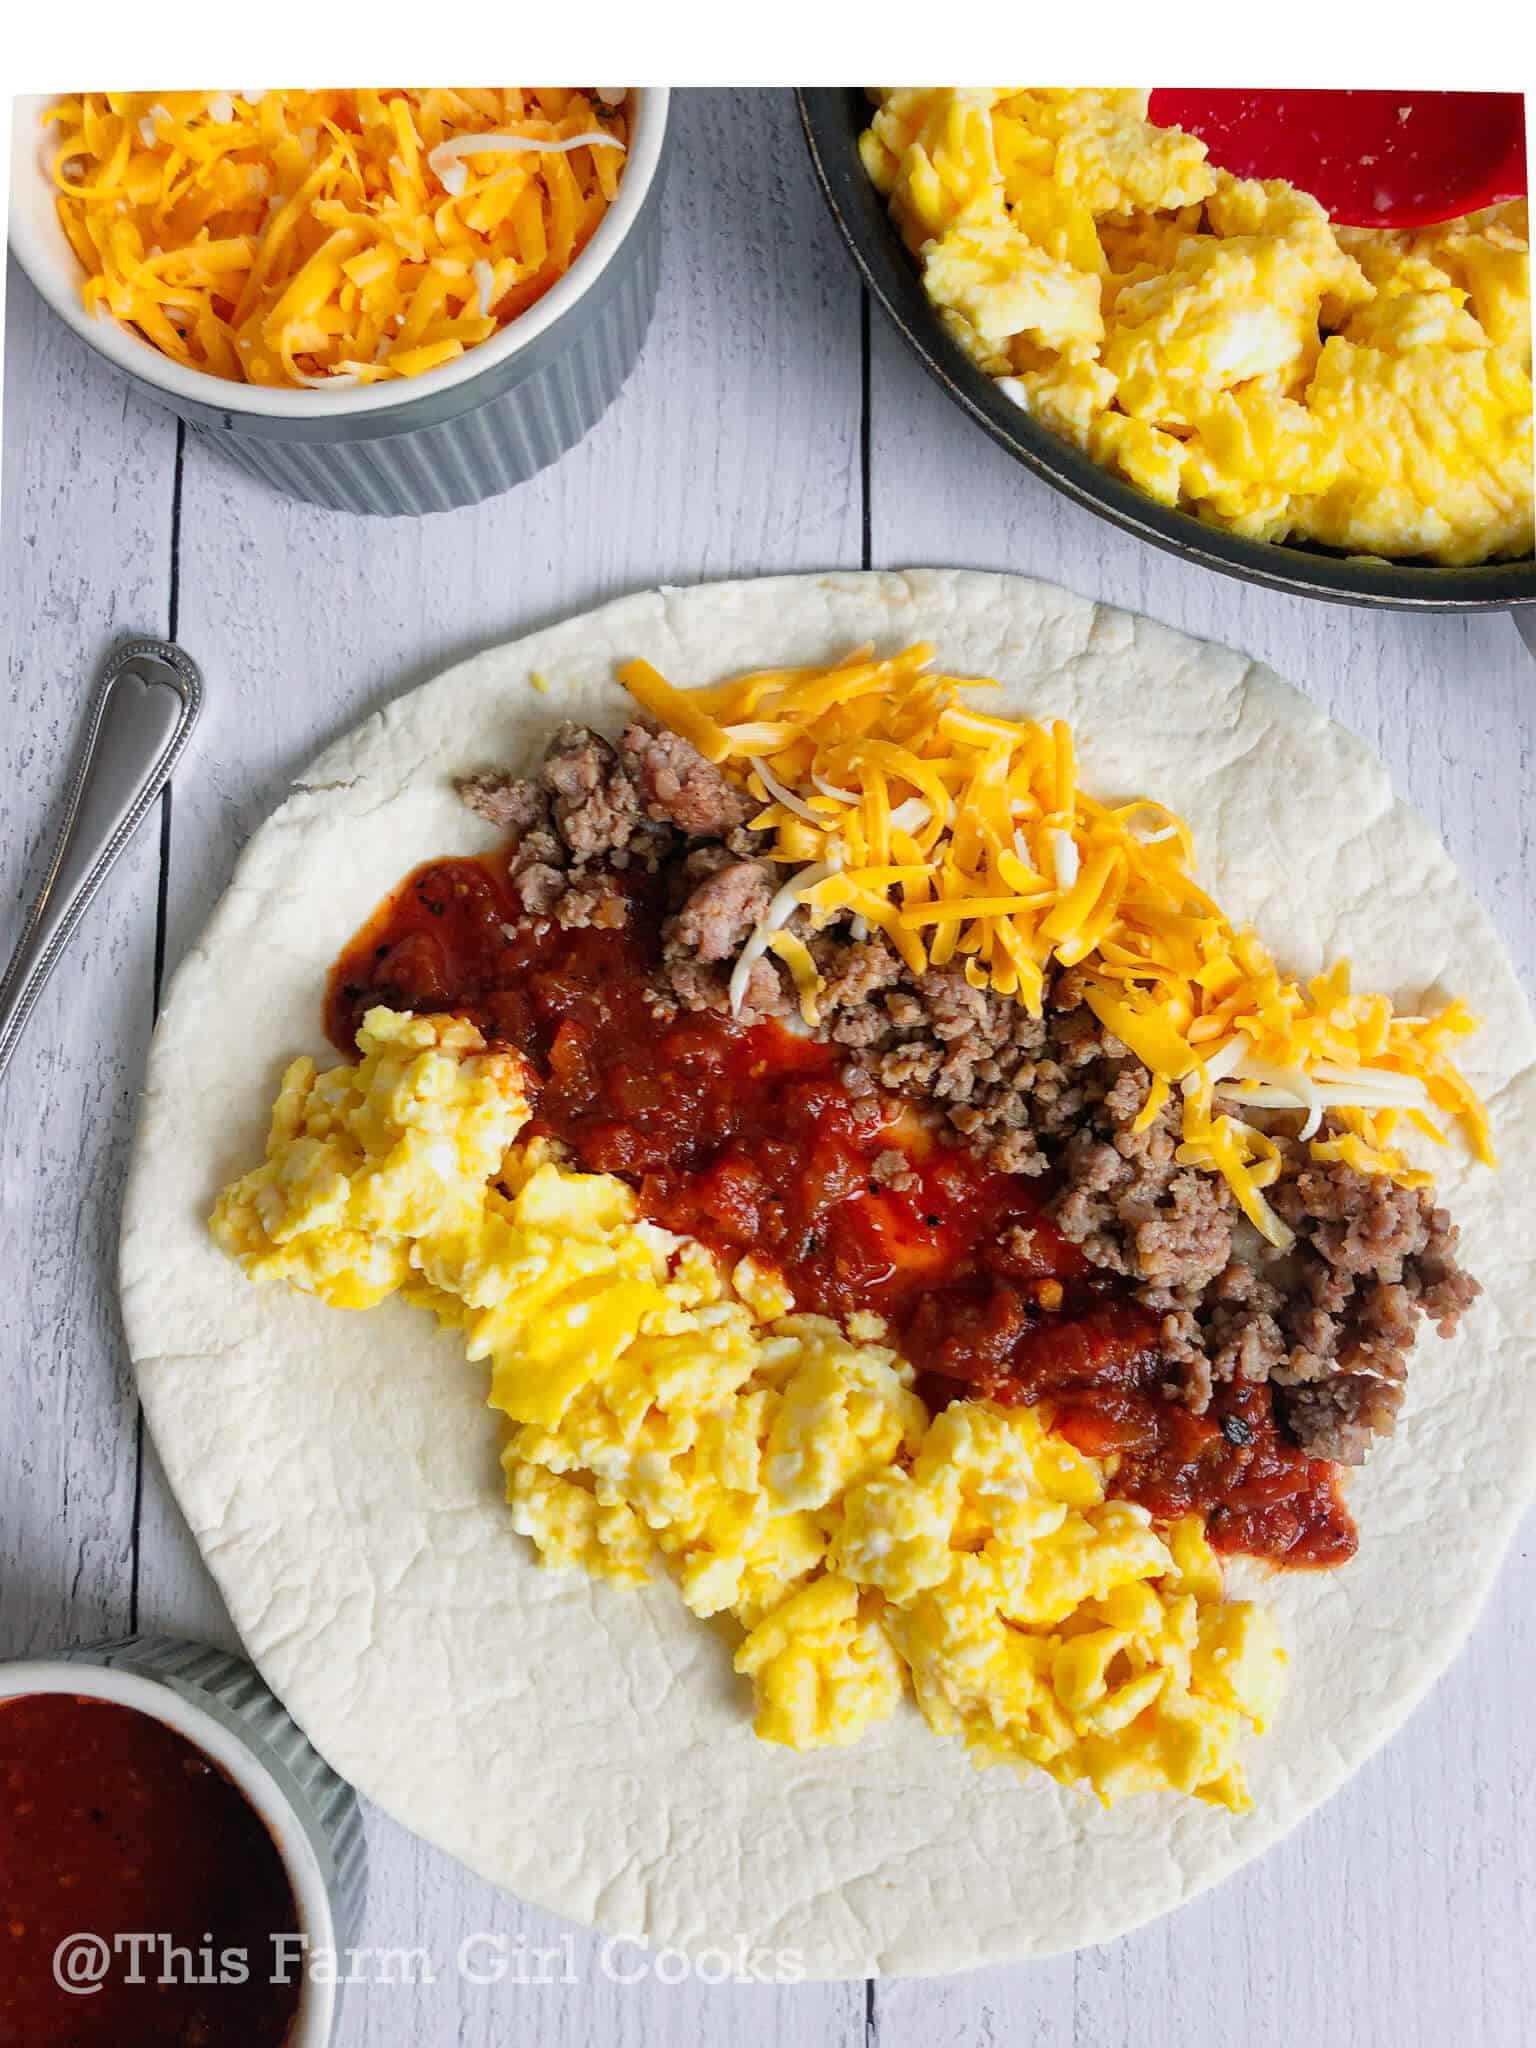 A flour tortilla lined with scrambled eggs, salsa, sausage and cheese.